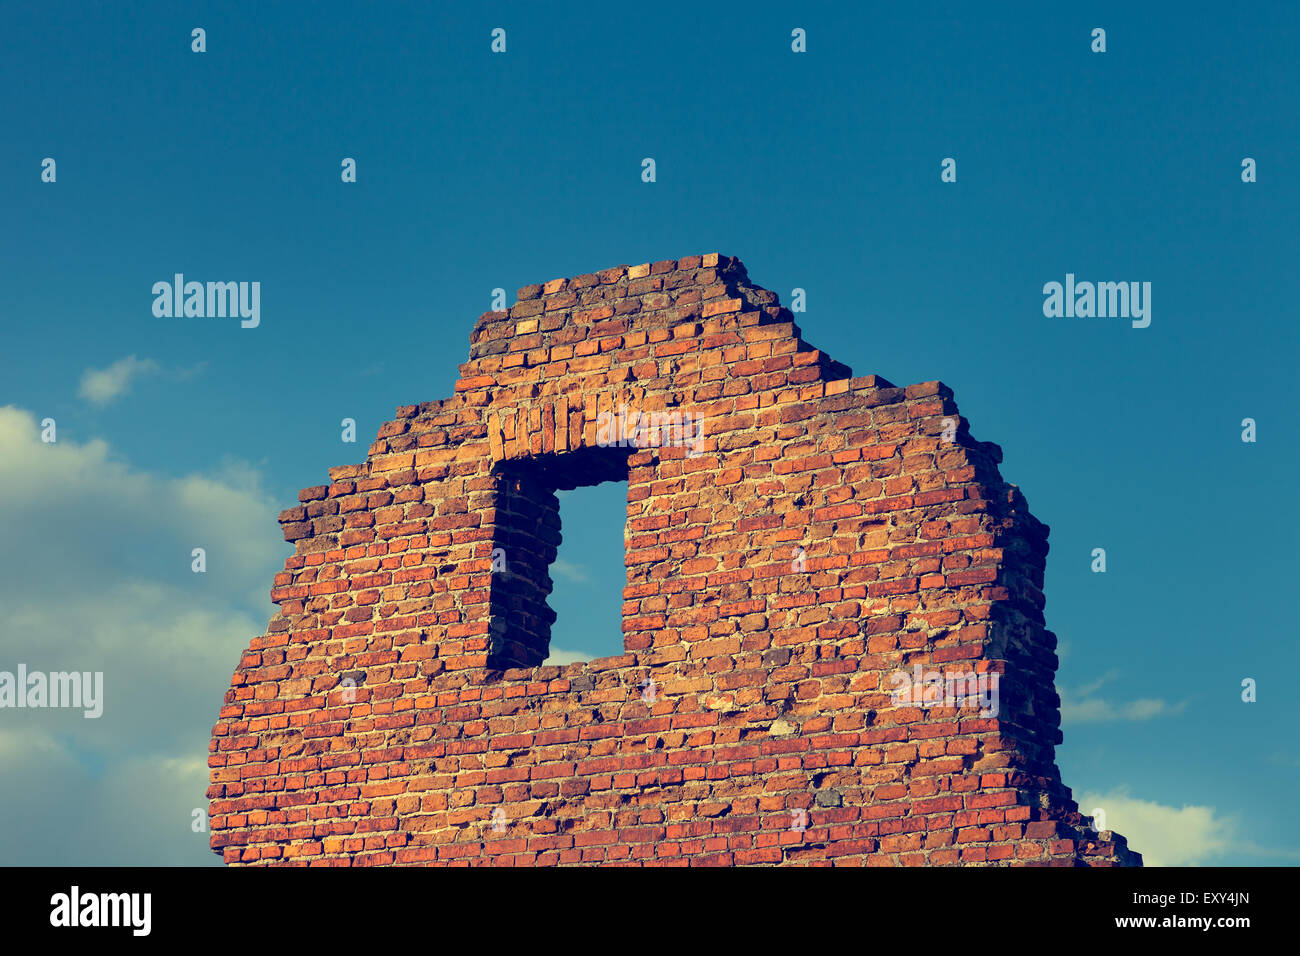 Fragment of ancient ruined building with window on blue sky background. Stock Photo